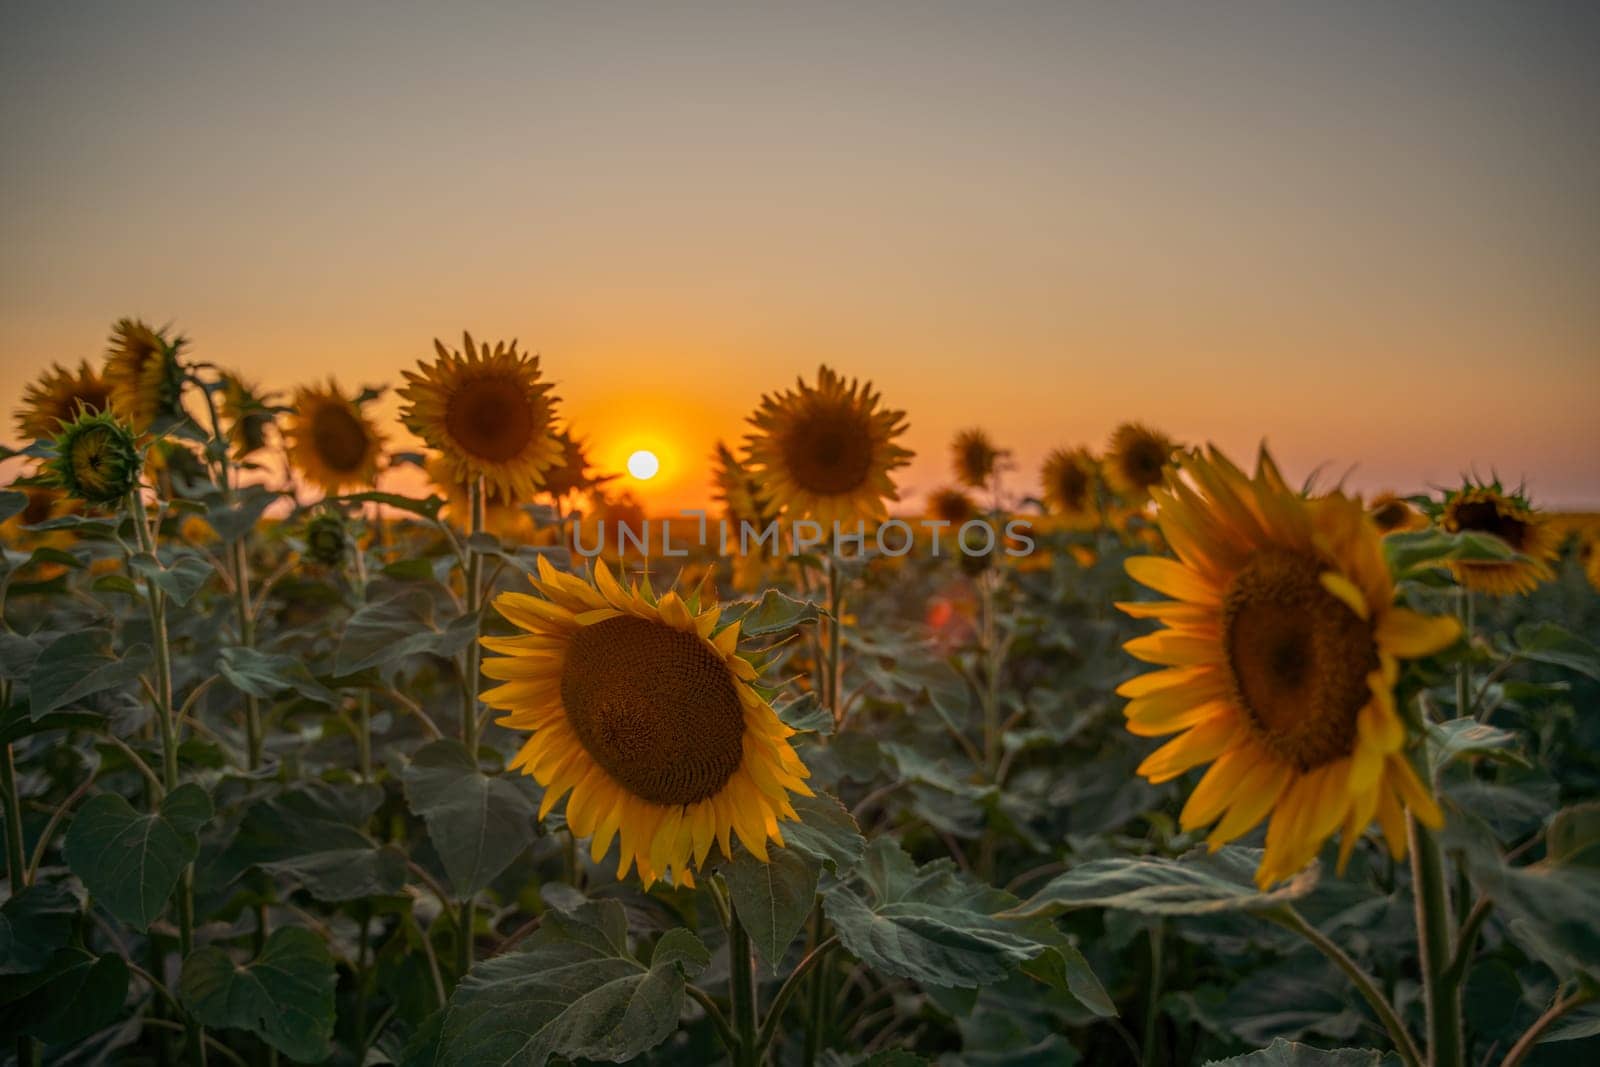 Field sunflowers in the warm light of the setting sun. Summer time. Concept agriculture oil production growing. by Matiunina